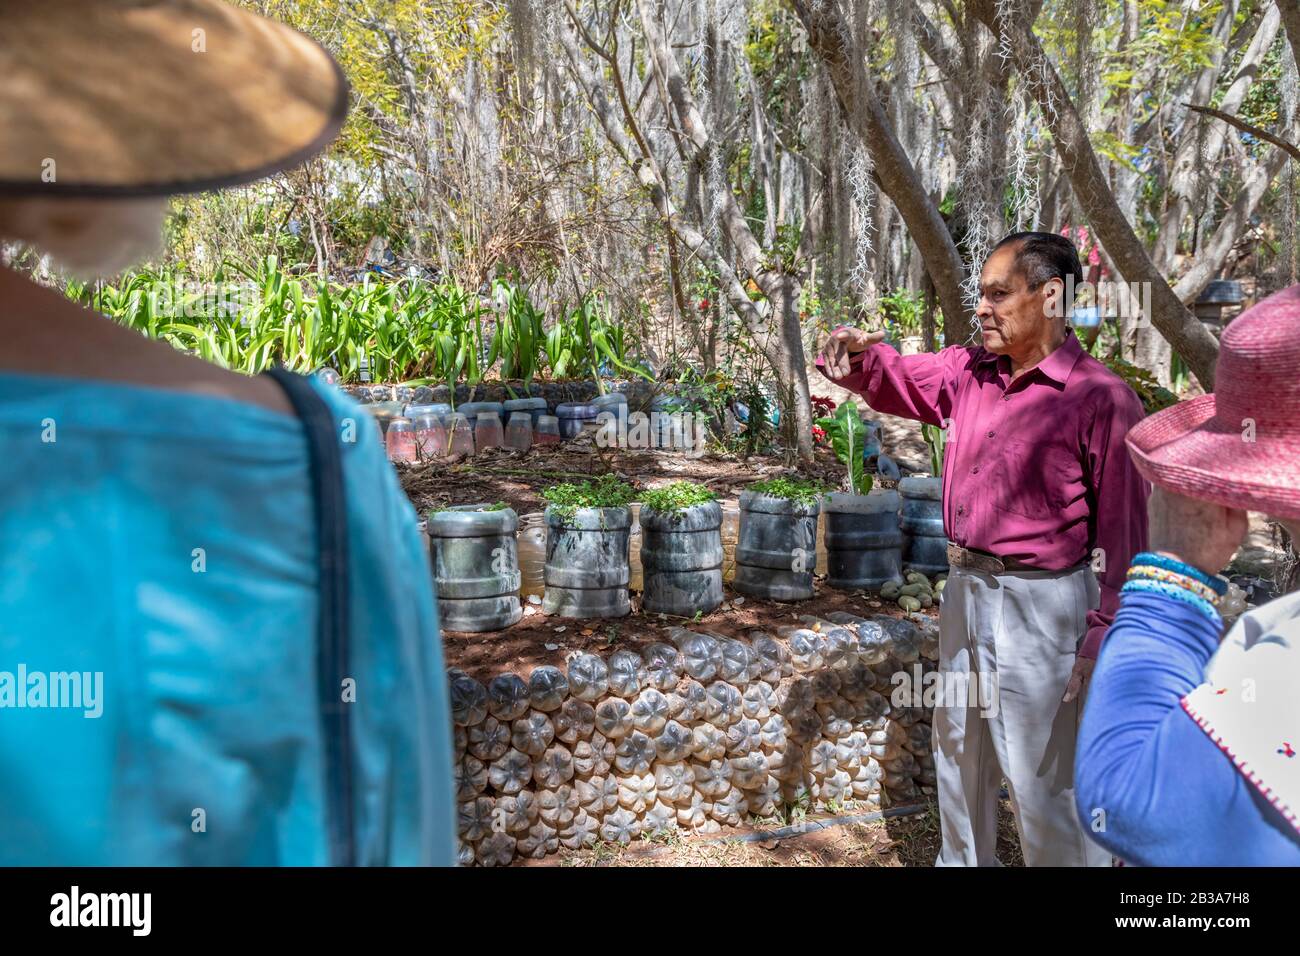 Yanhuitlan, Oaxaca, Mexico - Julio Miguel Ramírez talks with visitors about his work to restore the eroded landscape around his home. He uses various Stock Photo